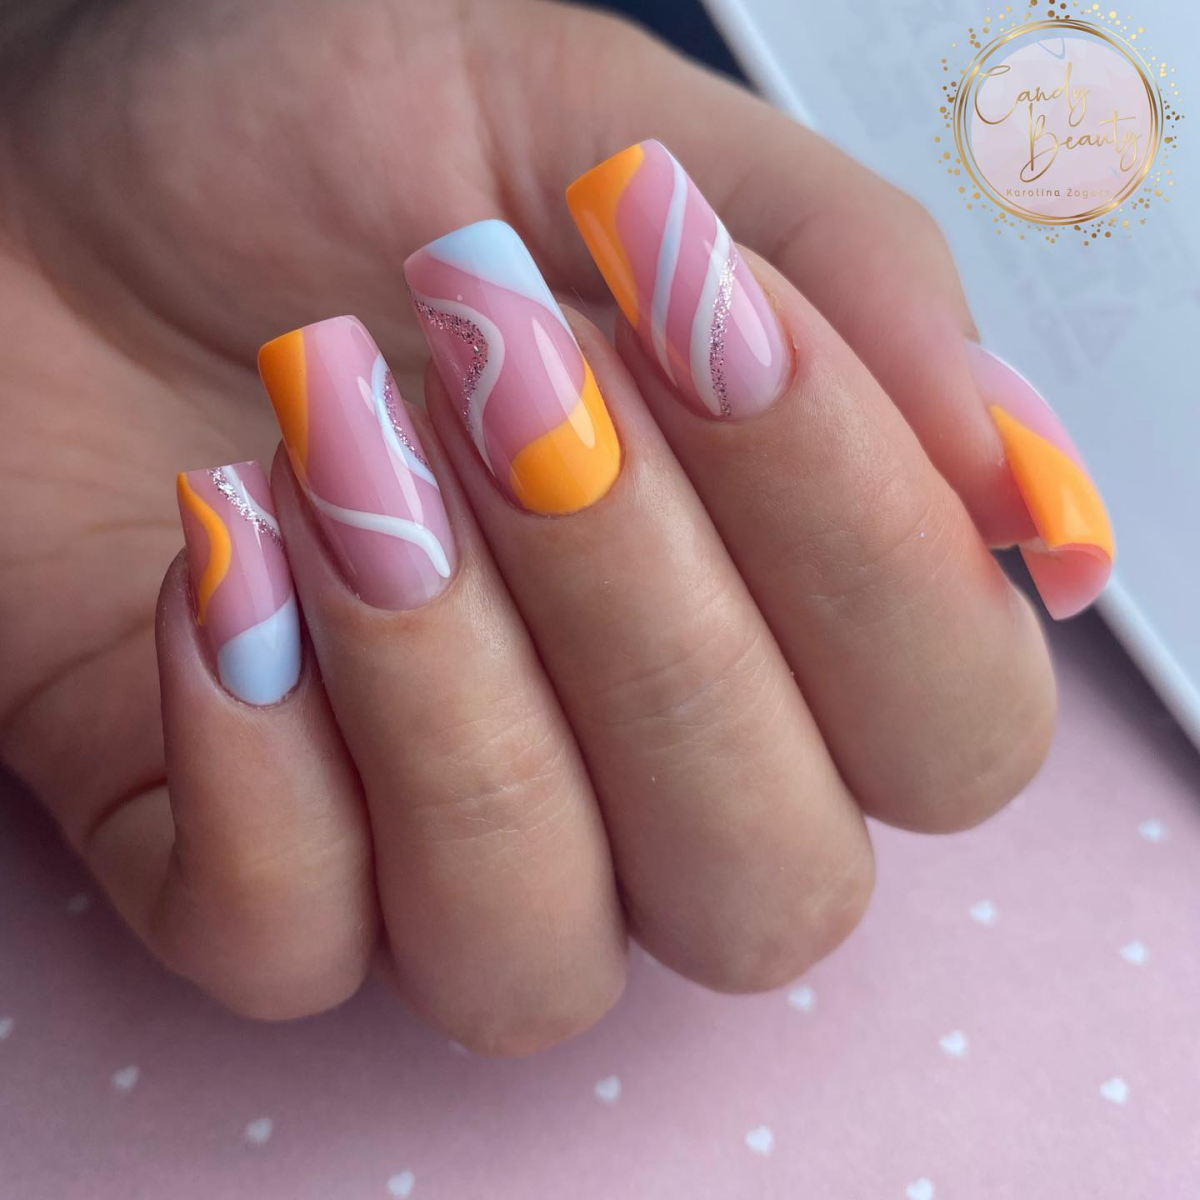 candybeauty kz bunte naegel sommer swirl nails